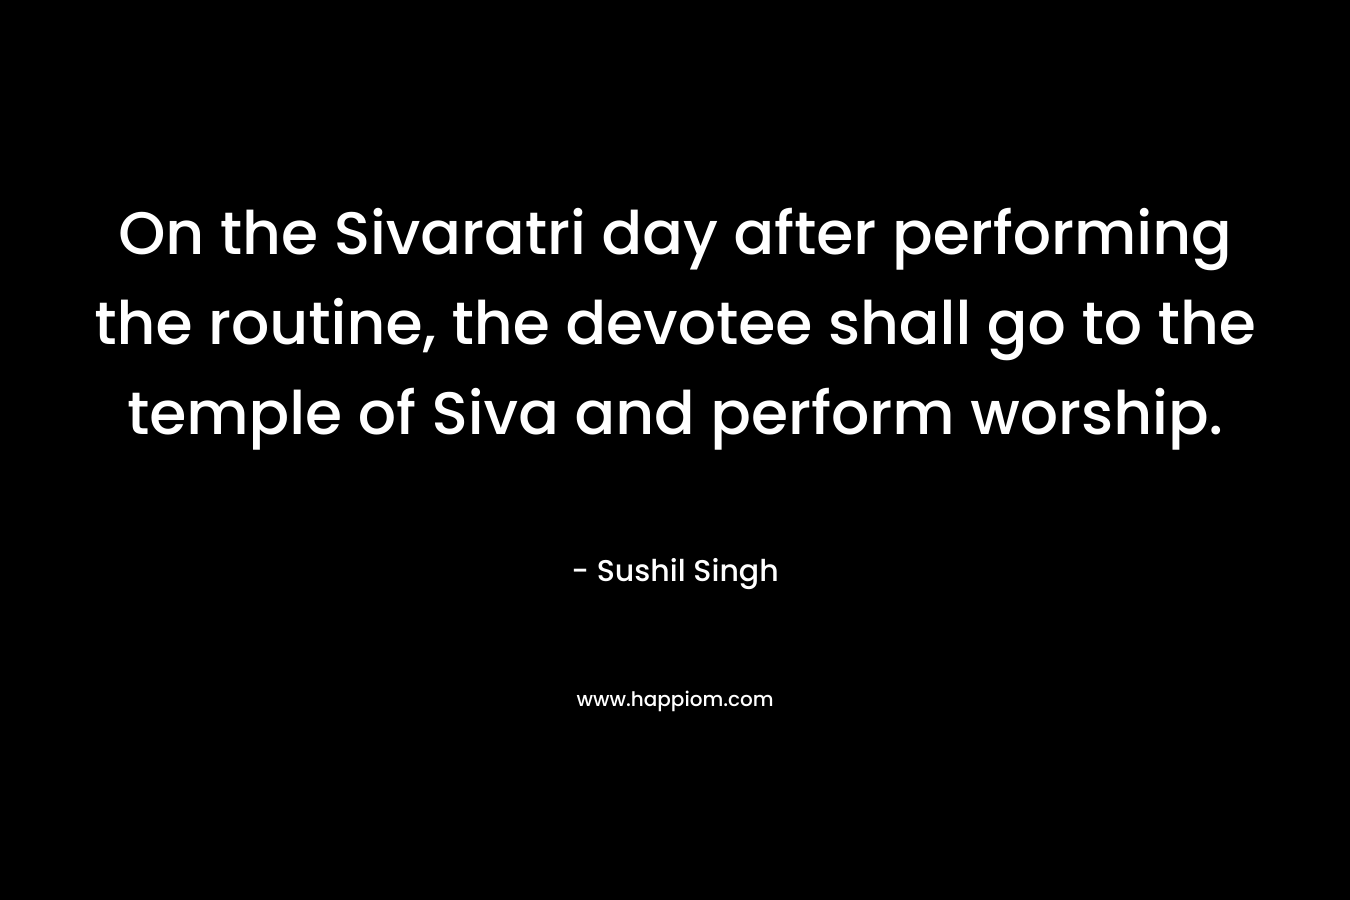 On the Sivaratri day after performing the routine, the devotee shall go to the temple of Siva and perform worship.